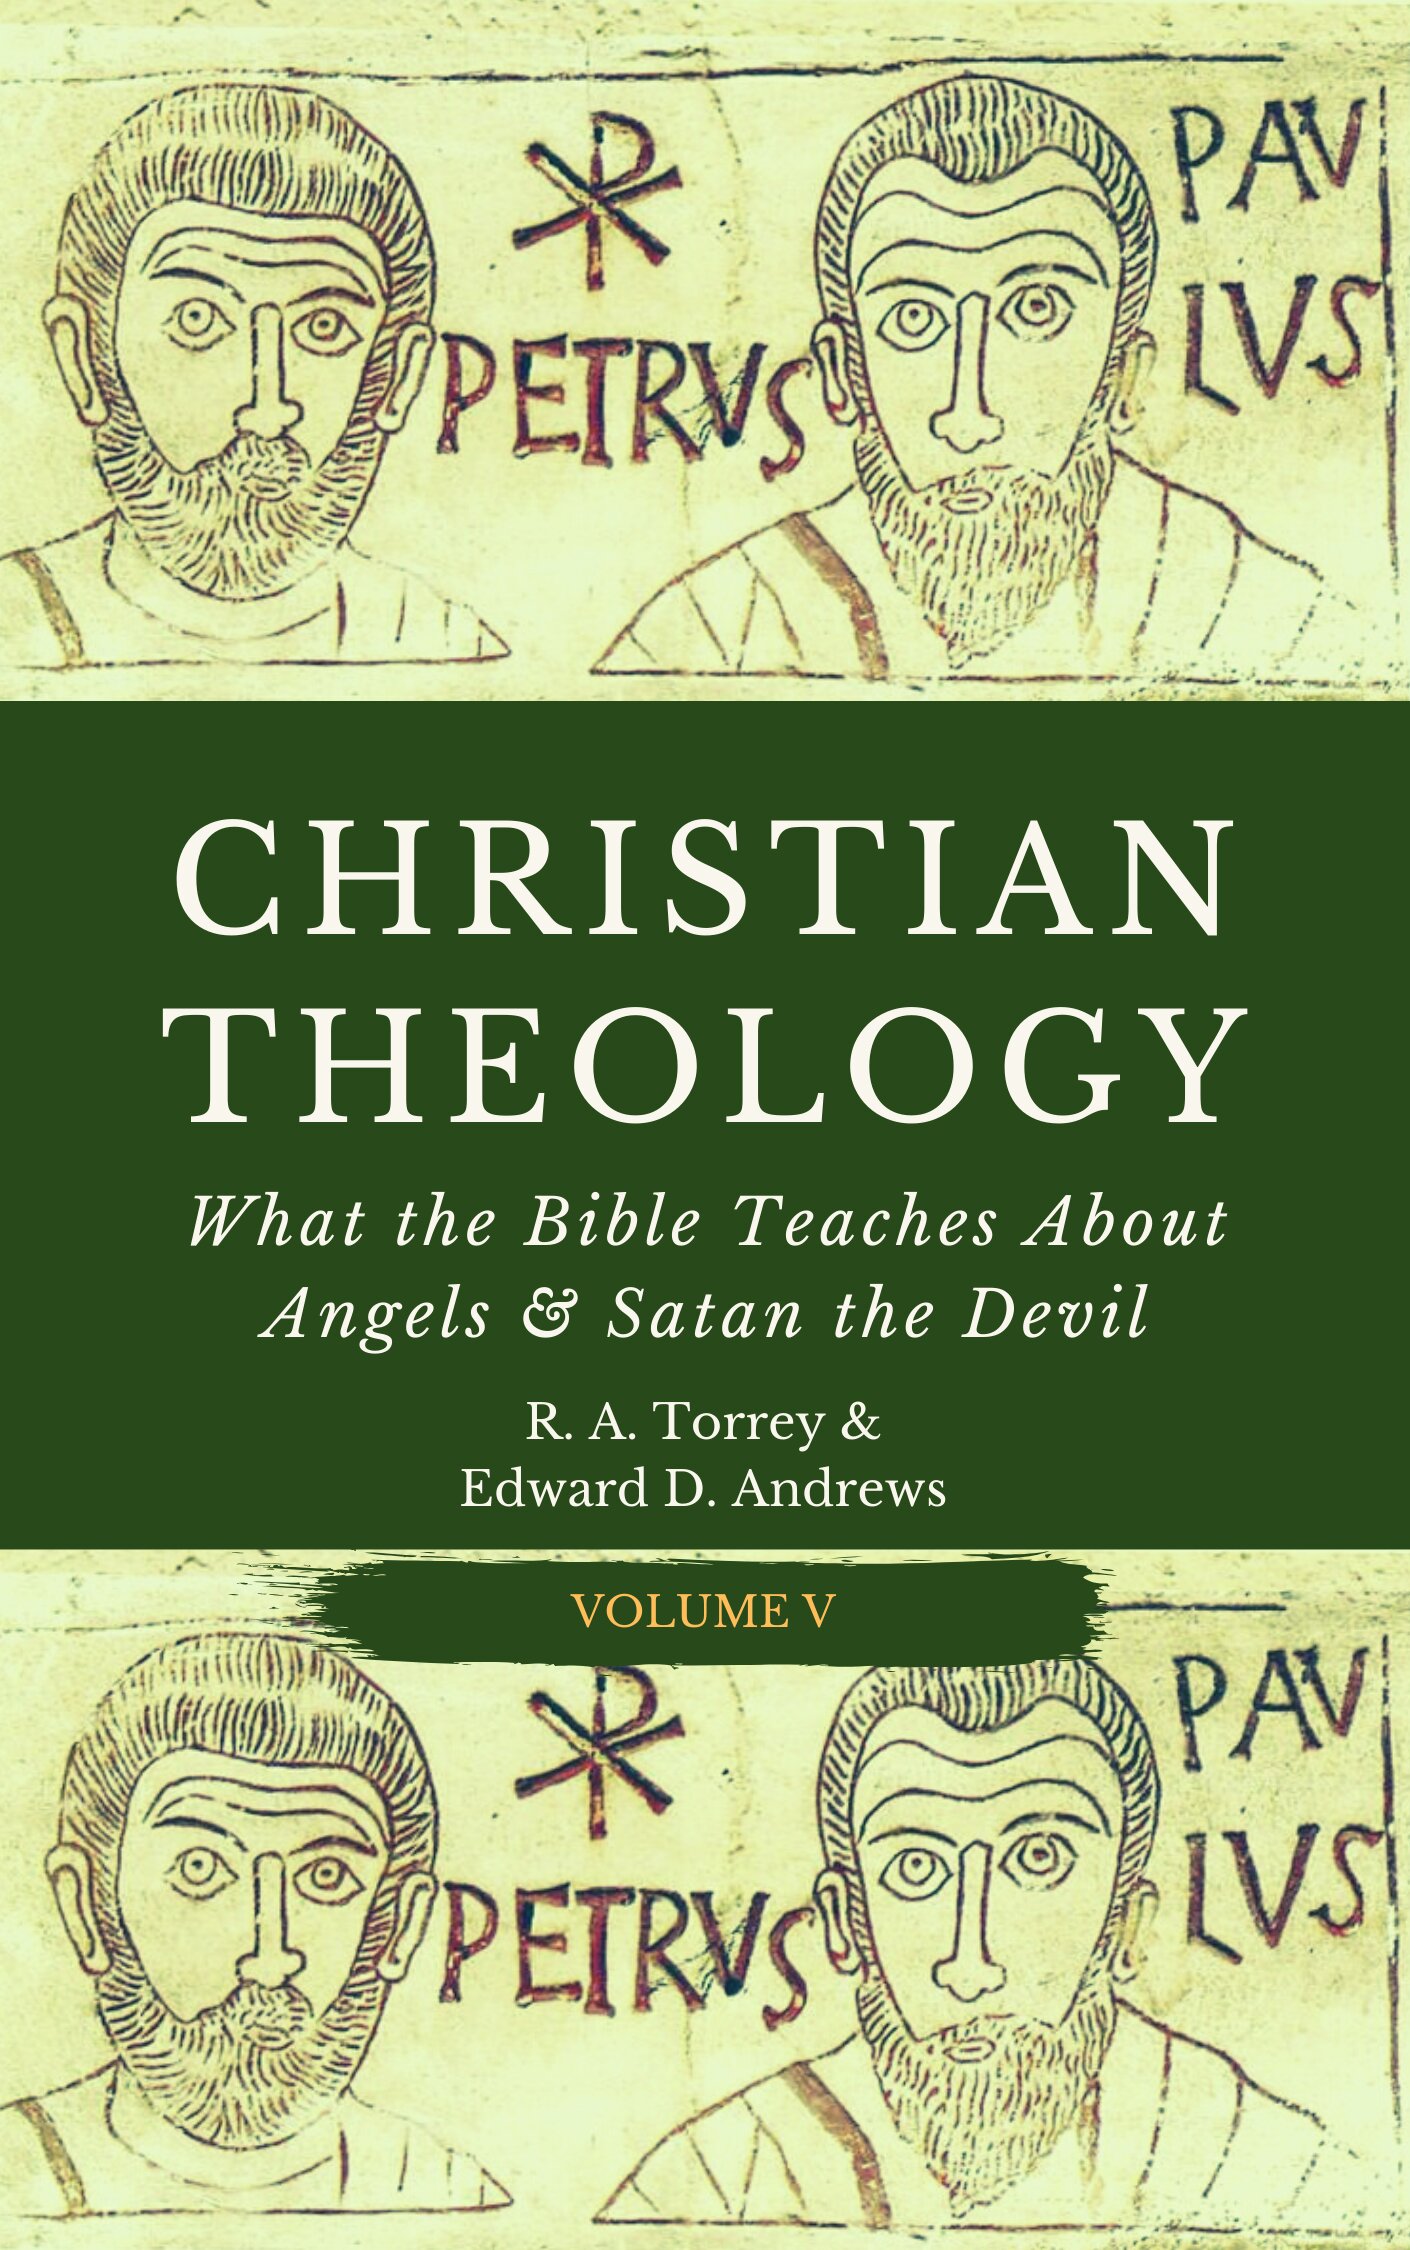 CHRISTIAN THEOLOGY What the Bible Teaches About Angels and Satan the Devil [Vol. V]